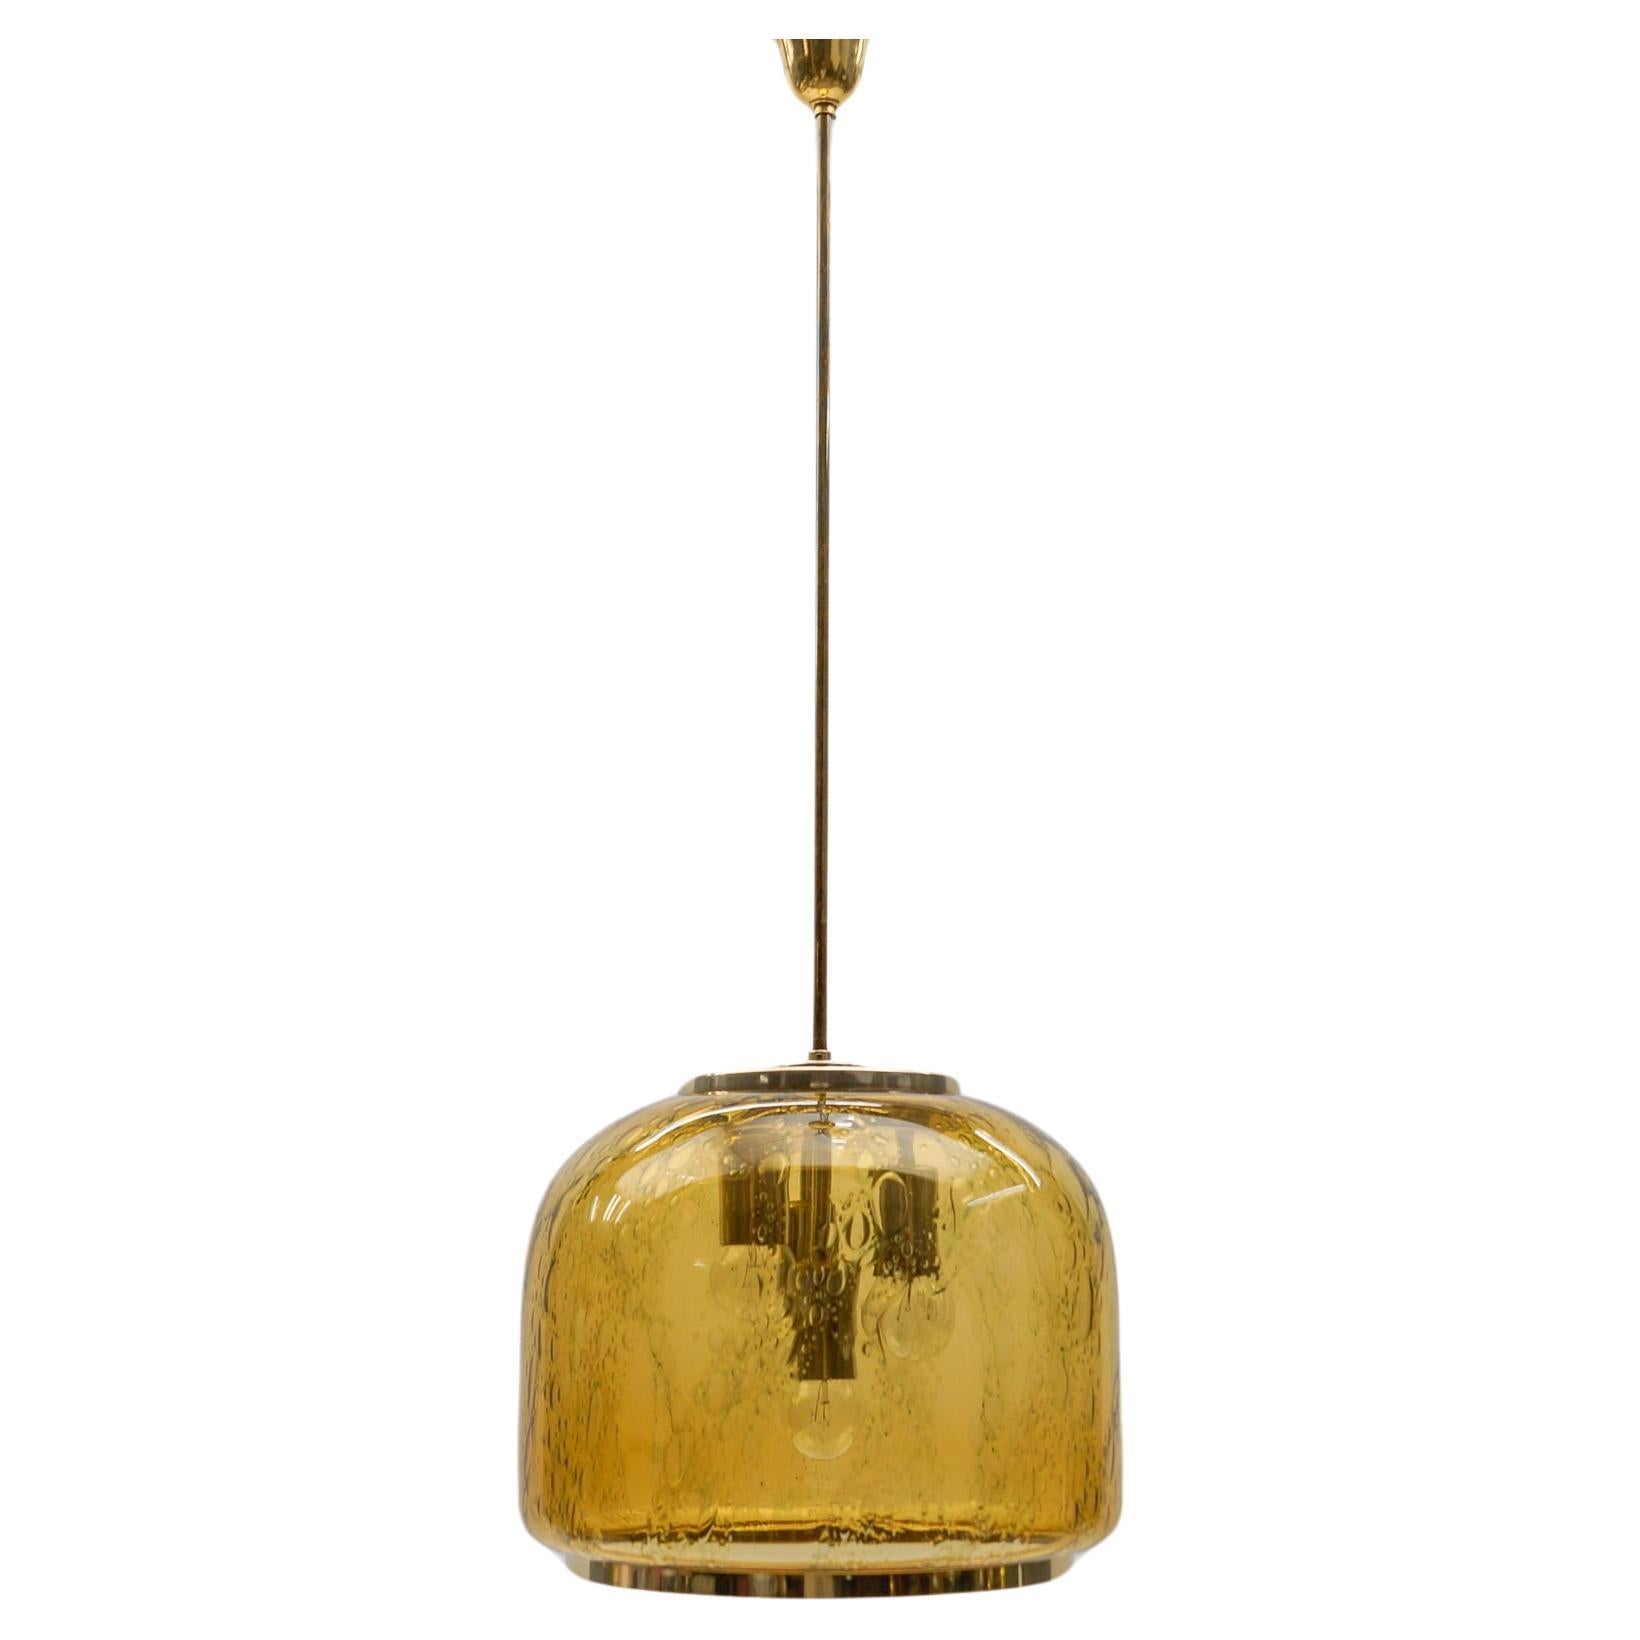 Huge Airbubble Glass Pendant Lamp by Doria, 1960s - Mid-Century Modern - Germany